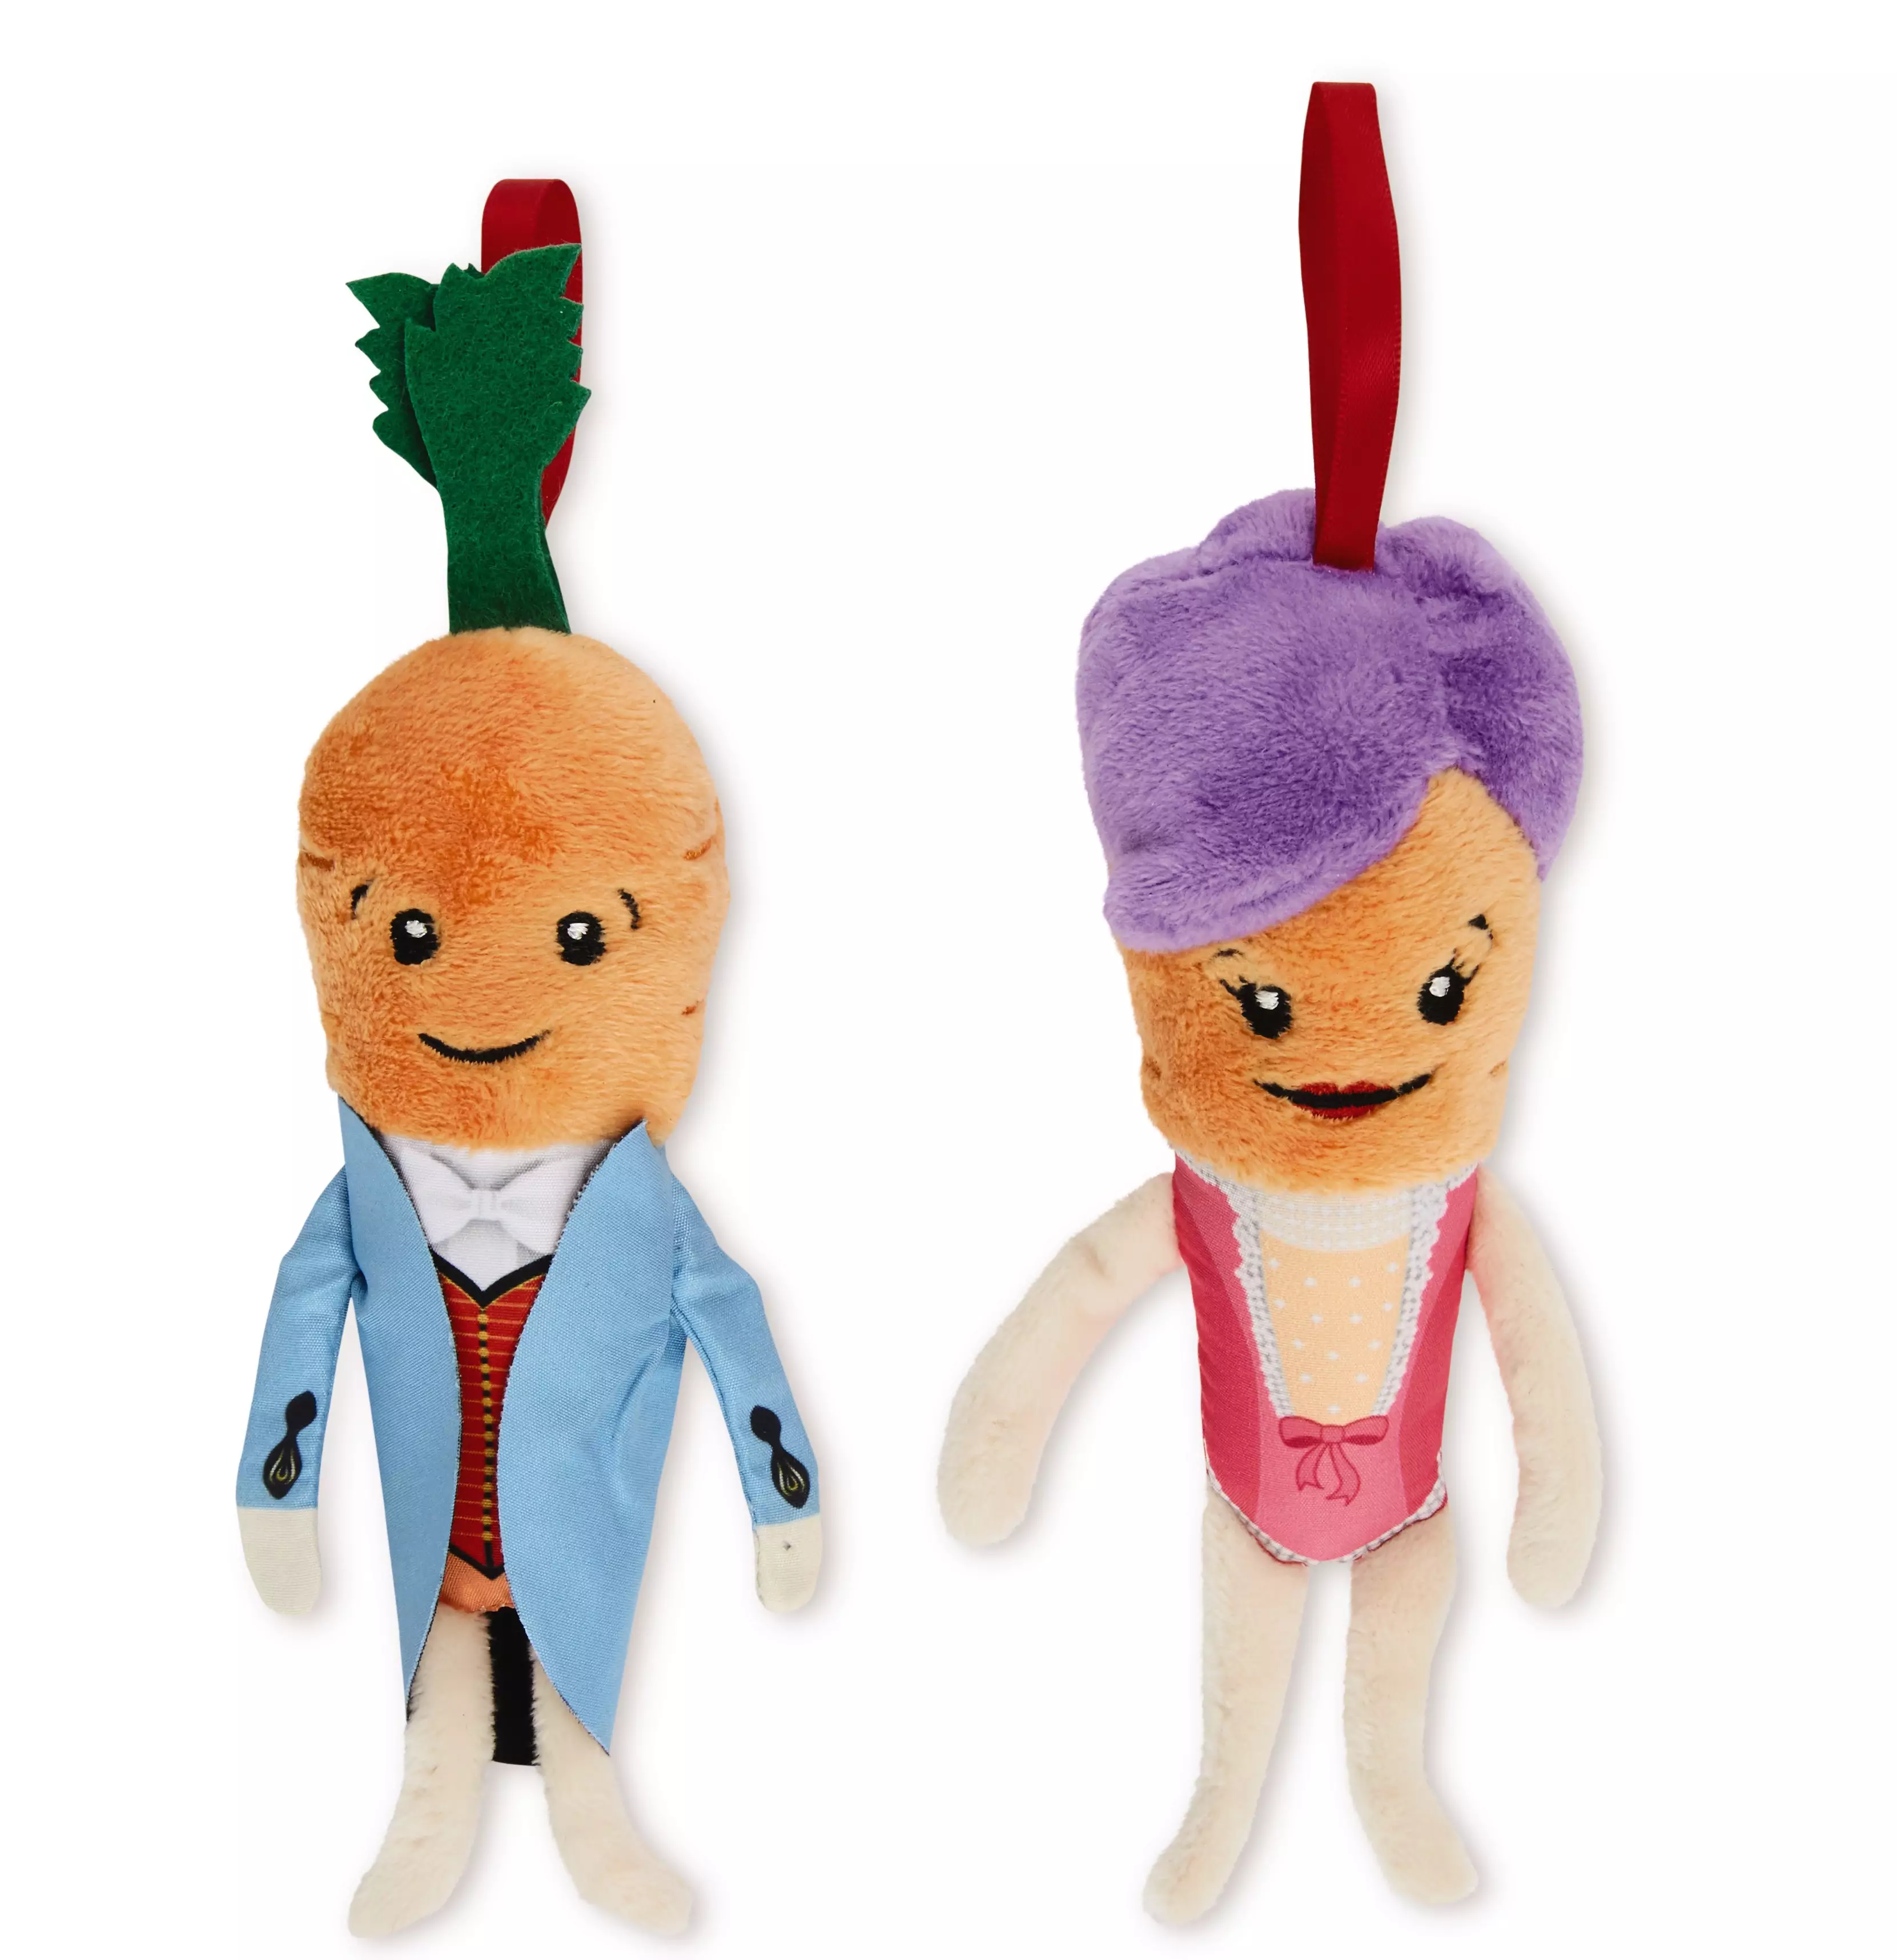 Giant Kevin and Katie toys are available to buy (